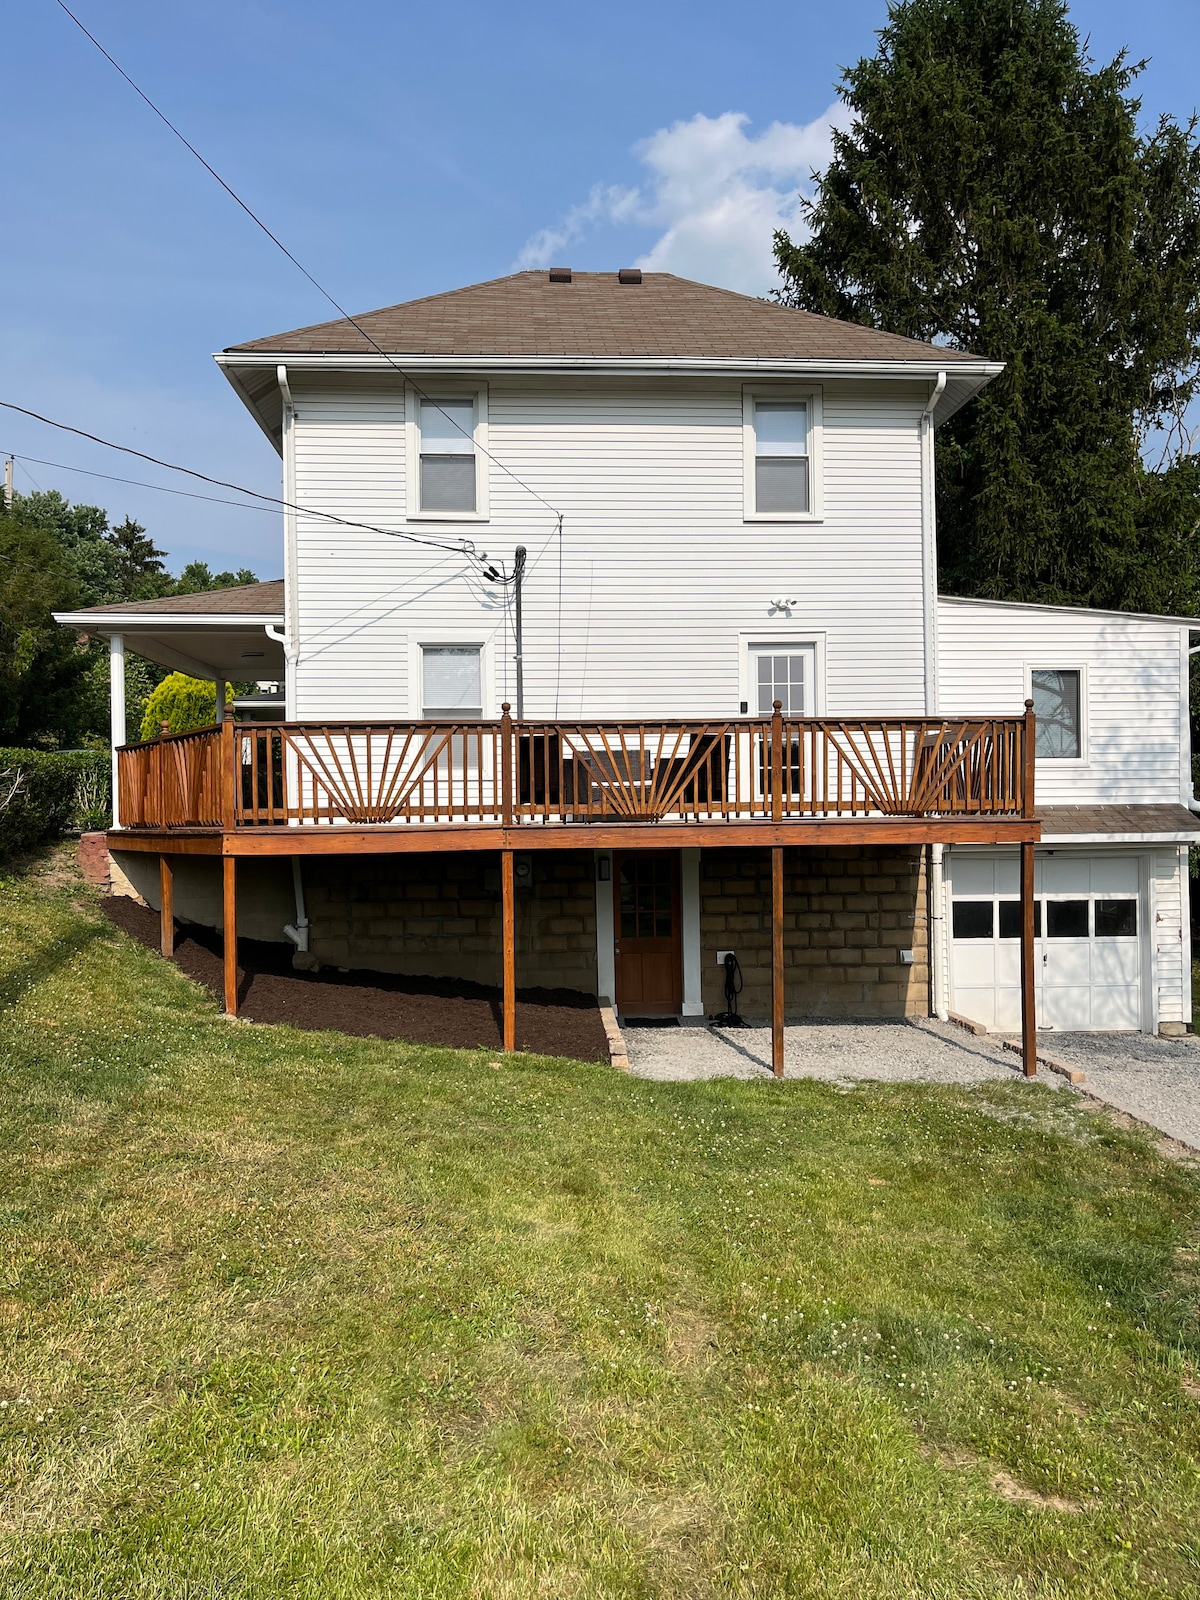 Beautiful 3BR 2BA Home, minutes to d/t Morgantown